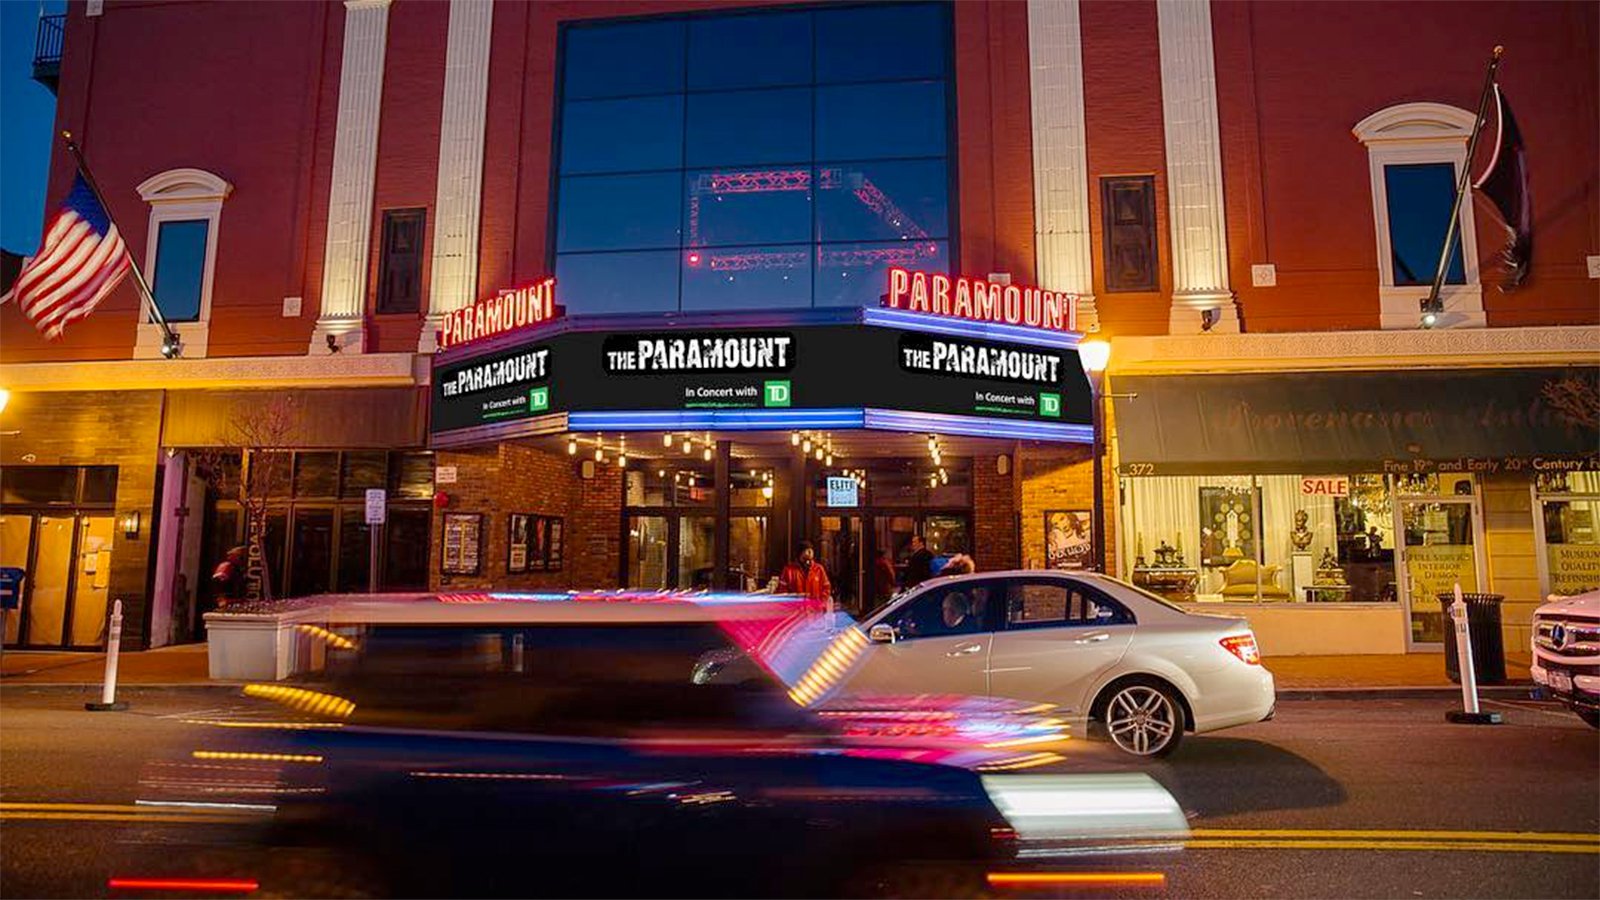 The Paramount makes list of top 5 club venues The Long Island Times